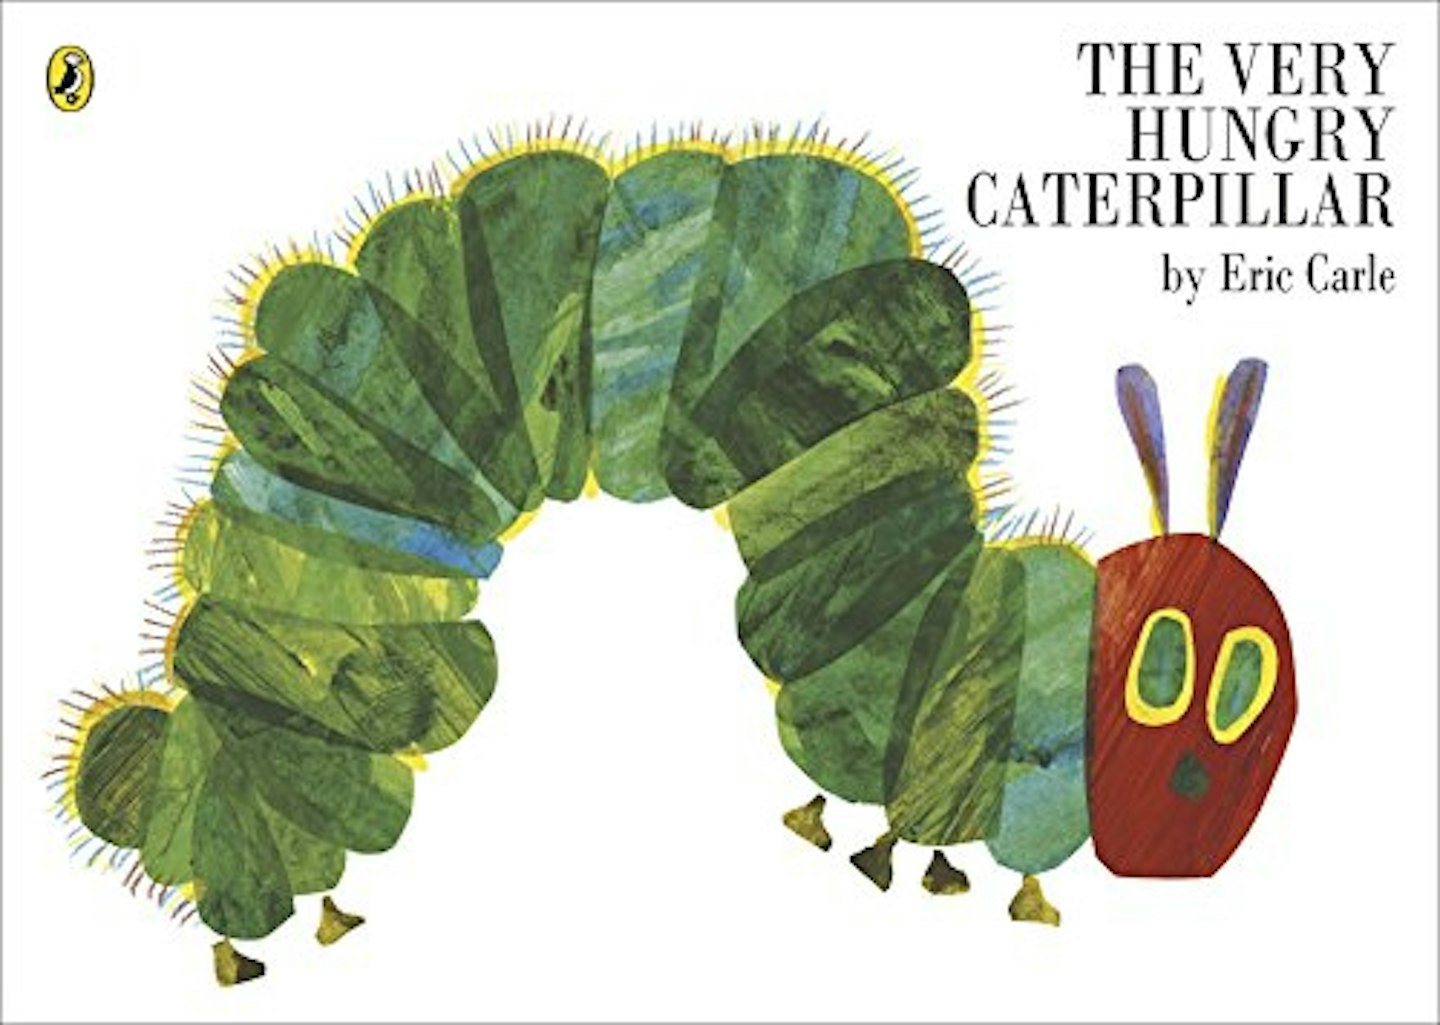 The Very Hungry Caterpillar - Baby shower gift